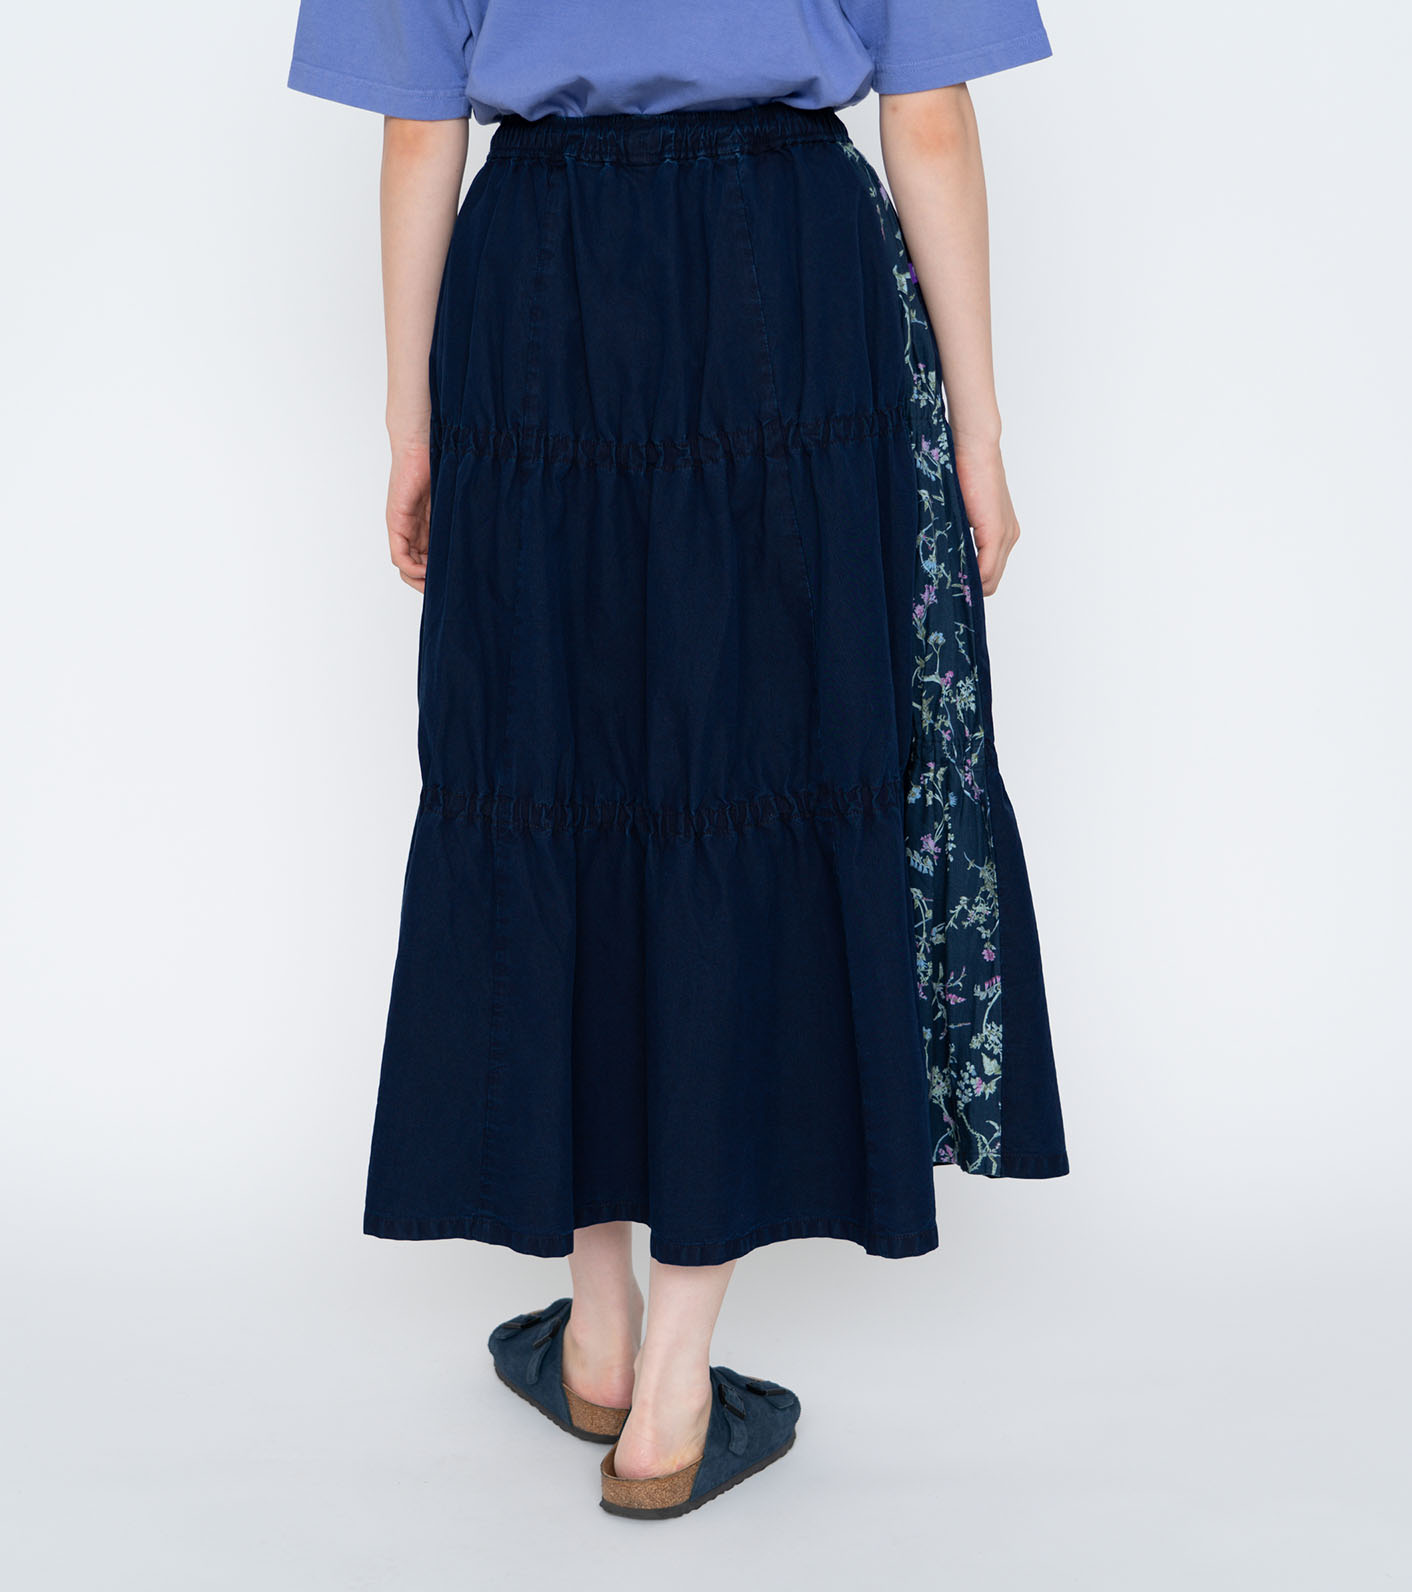 nanamica / Field Tiered Skirt